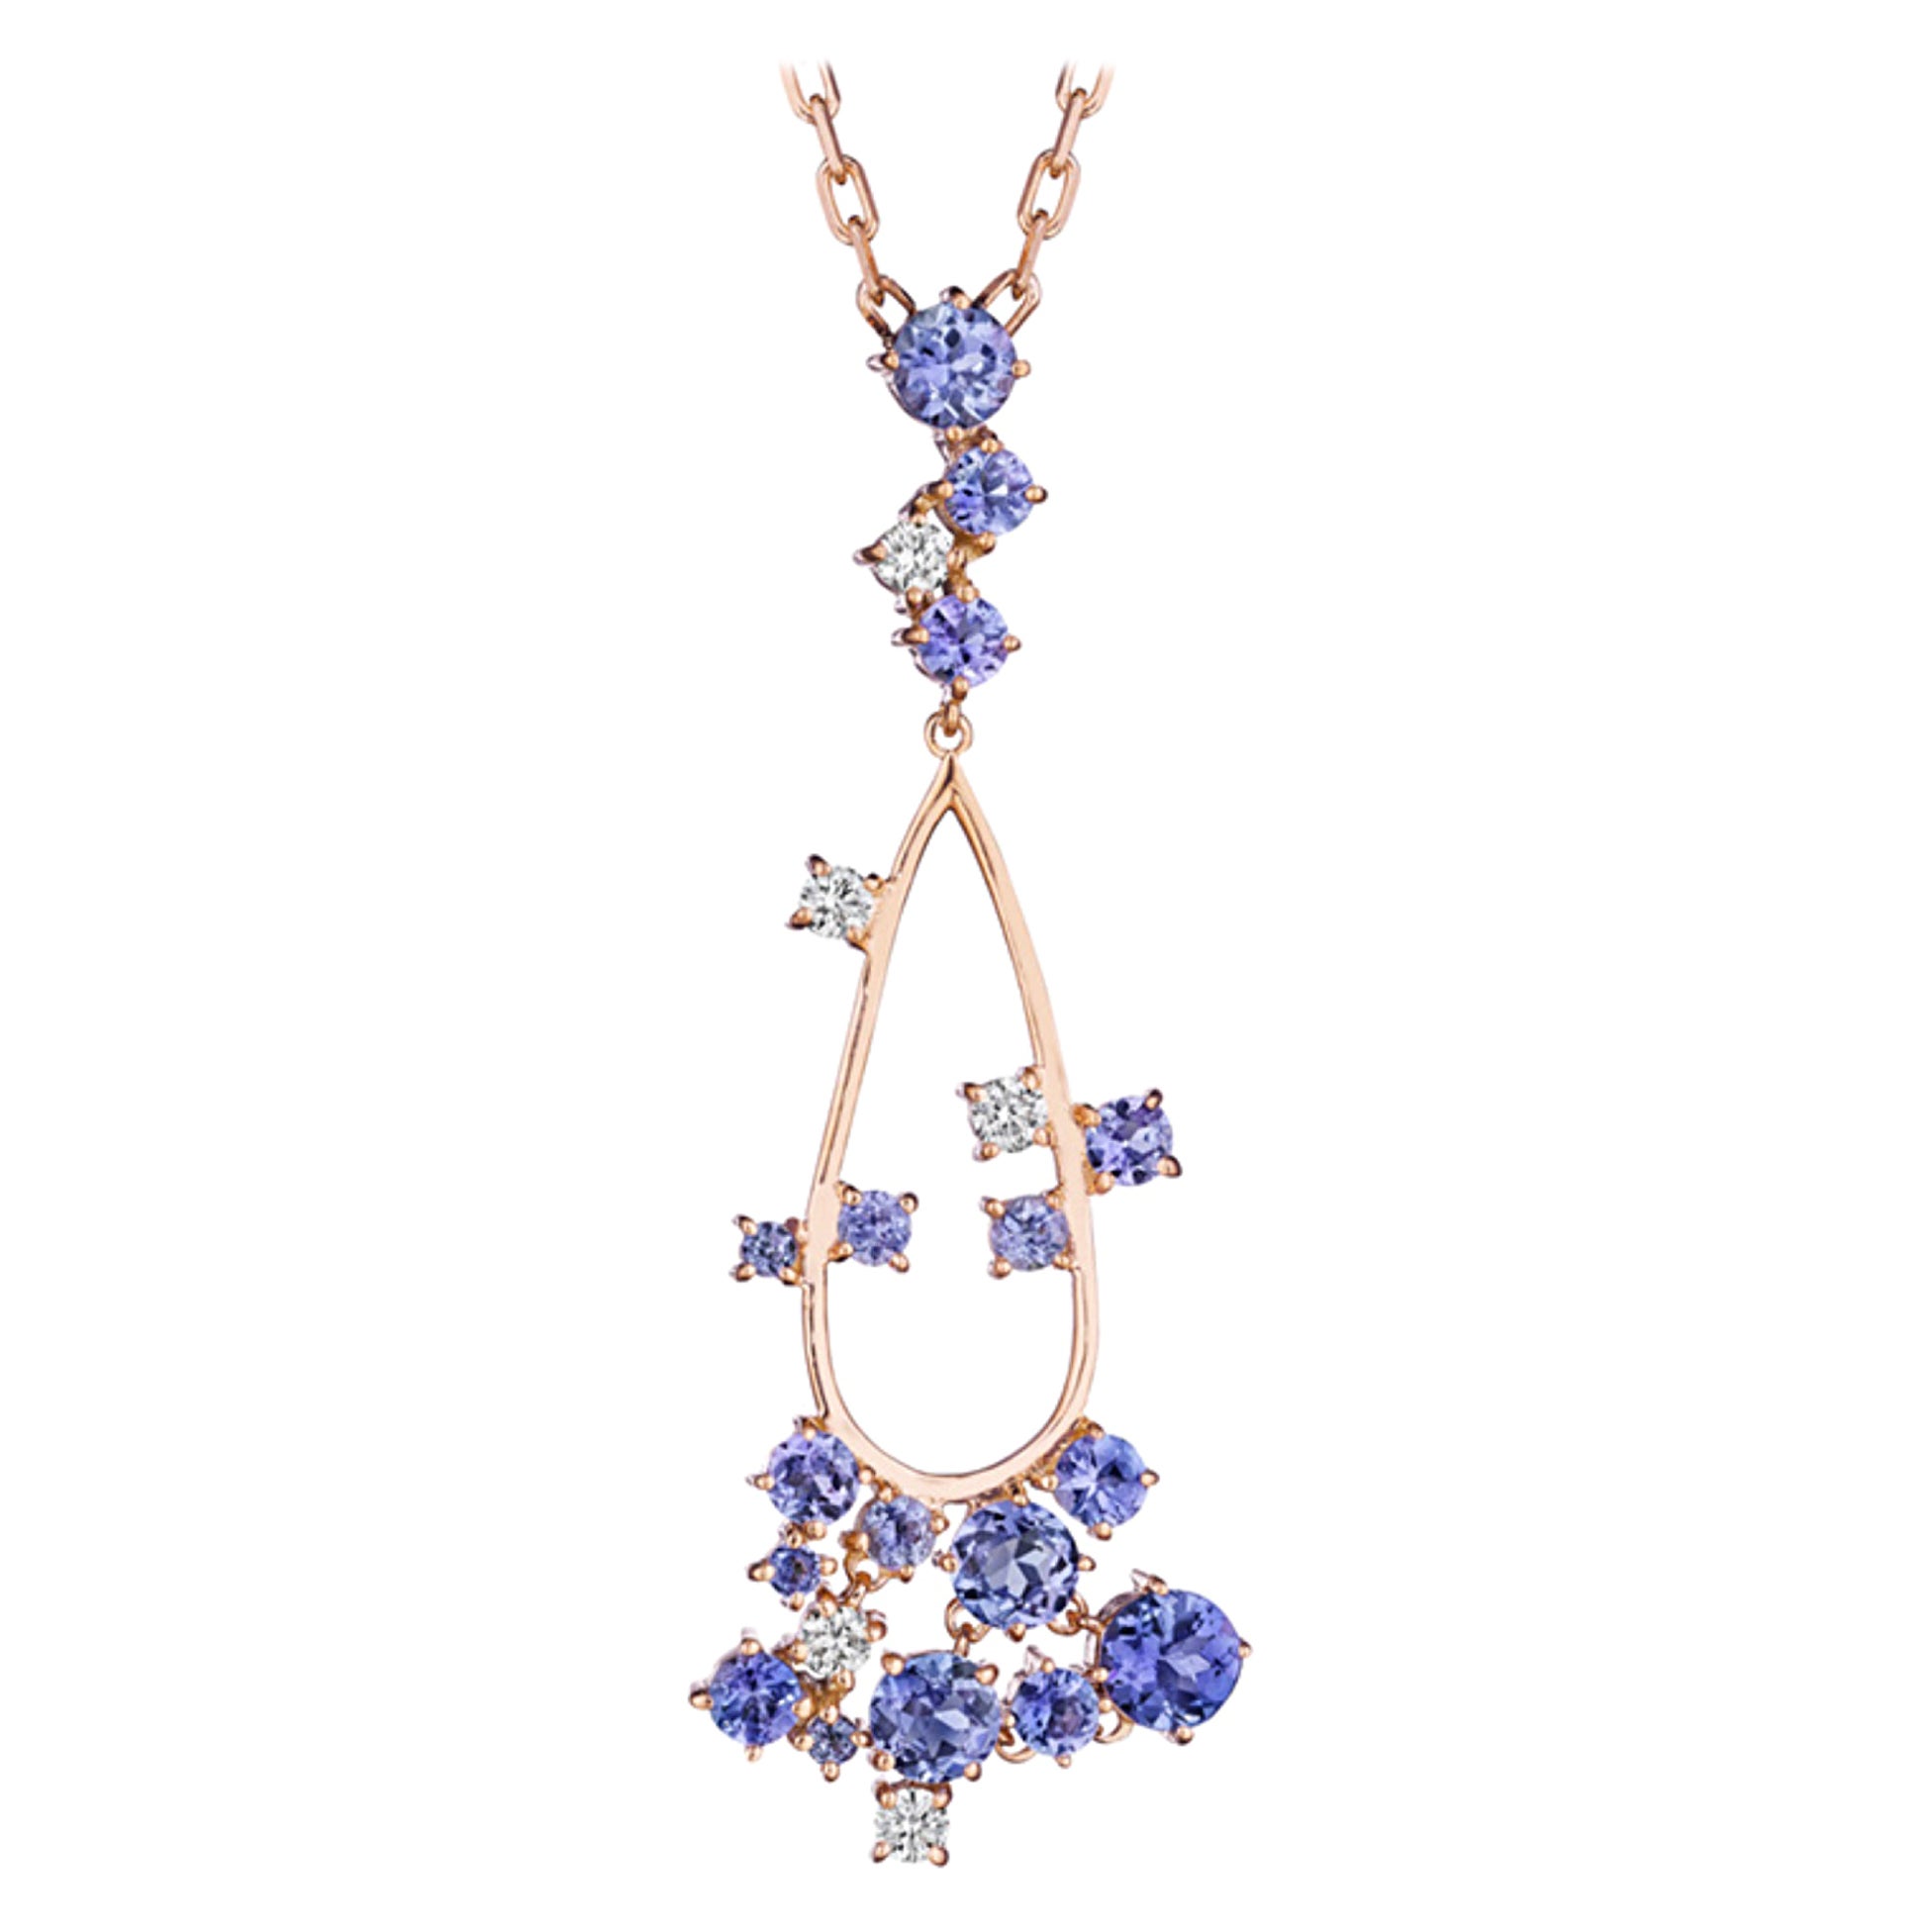 Melting Ice 18k Yellow Gold Tanzanite Drop Necklace by MadStone